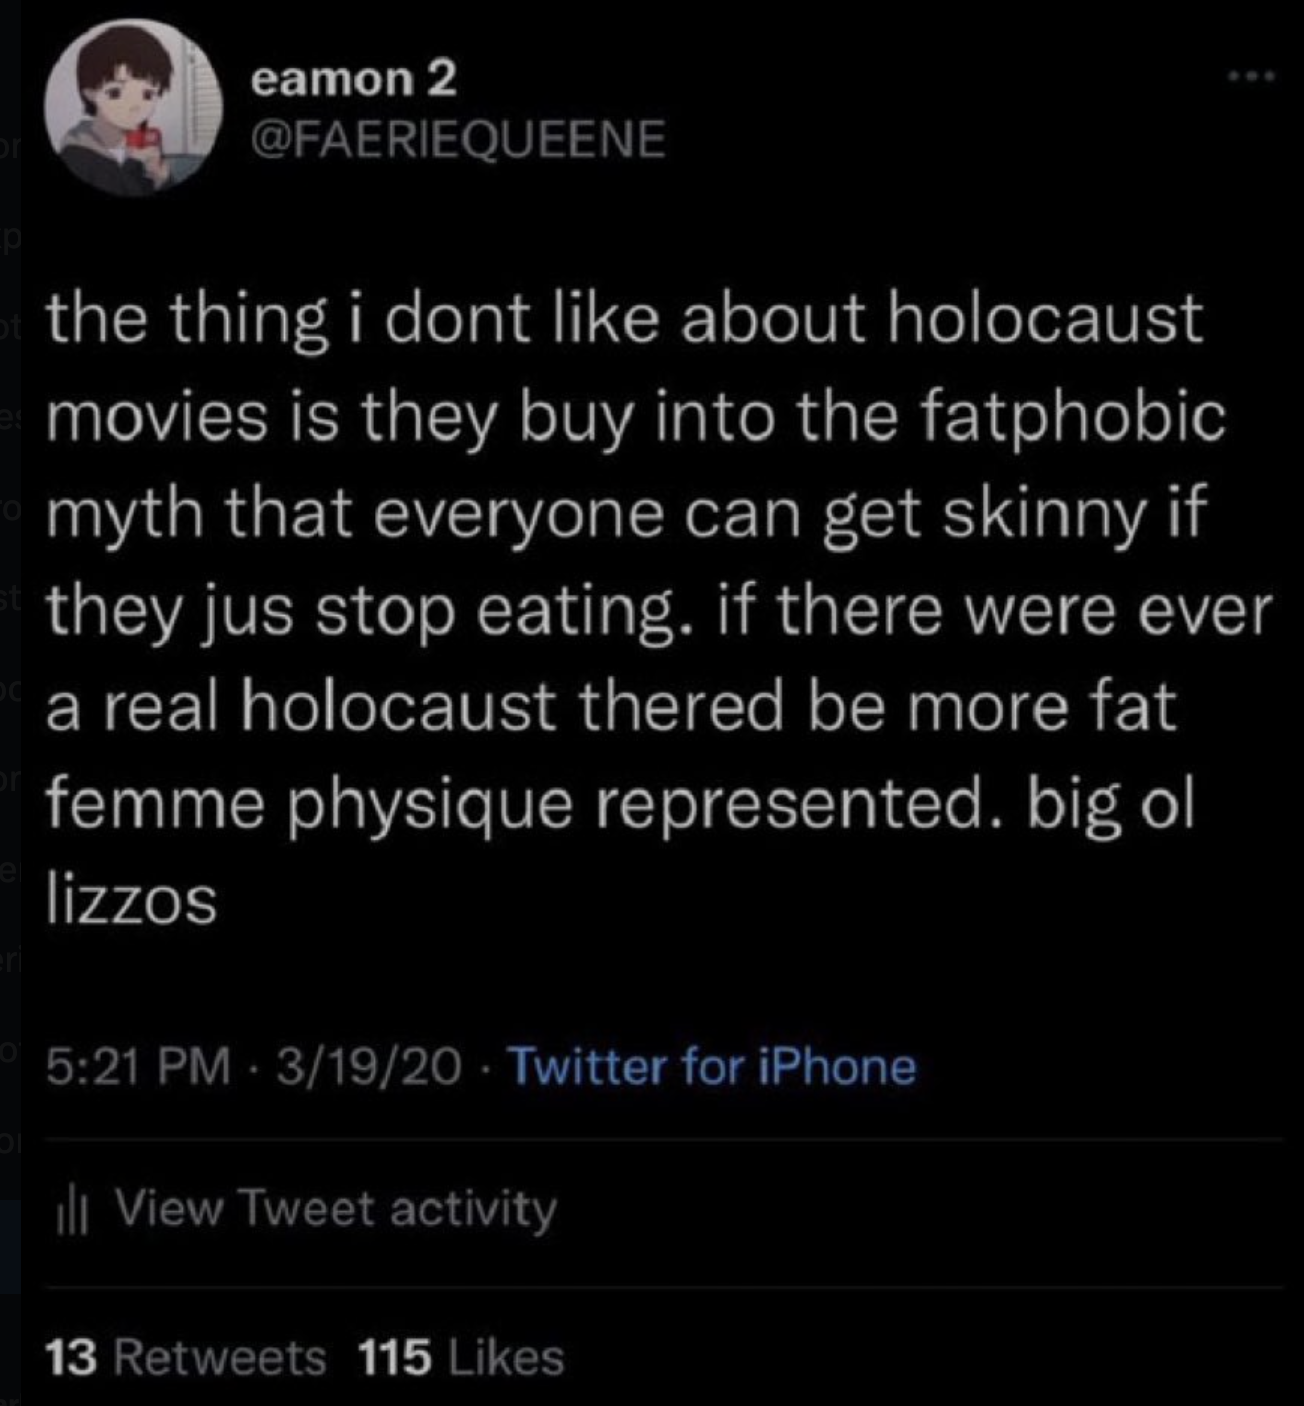 screenshot - eamon 2 the thing i dont about holocaust movies is they buy into the fatphobic myth that everyone can get skinny if they jus stop eating. if there were ever a real holocaust thered be more fat femme physique represented. big ol lizzos 31920 T